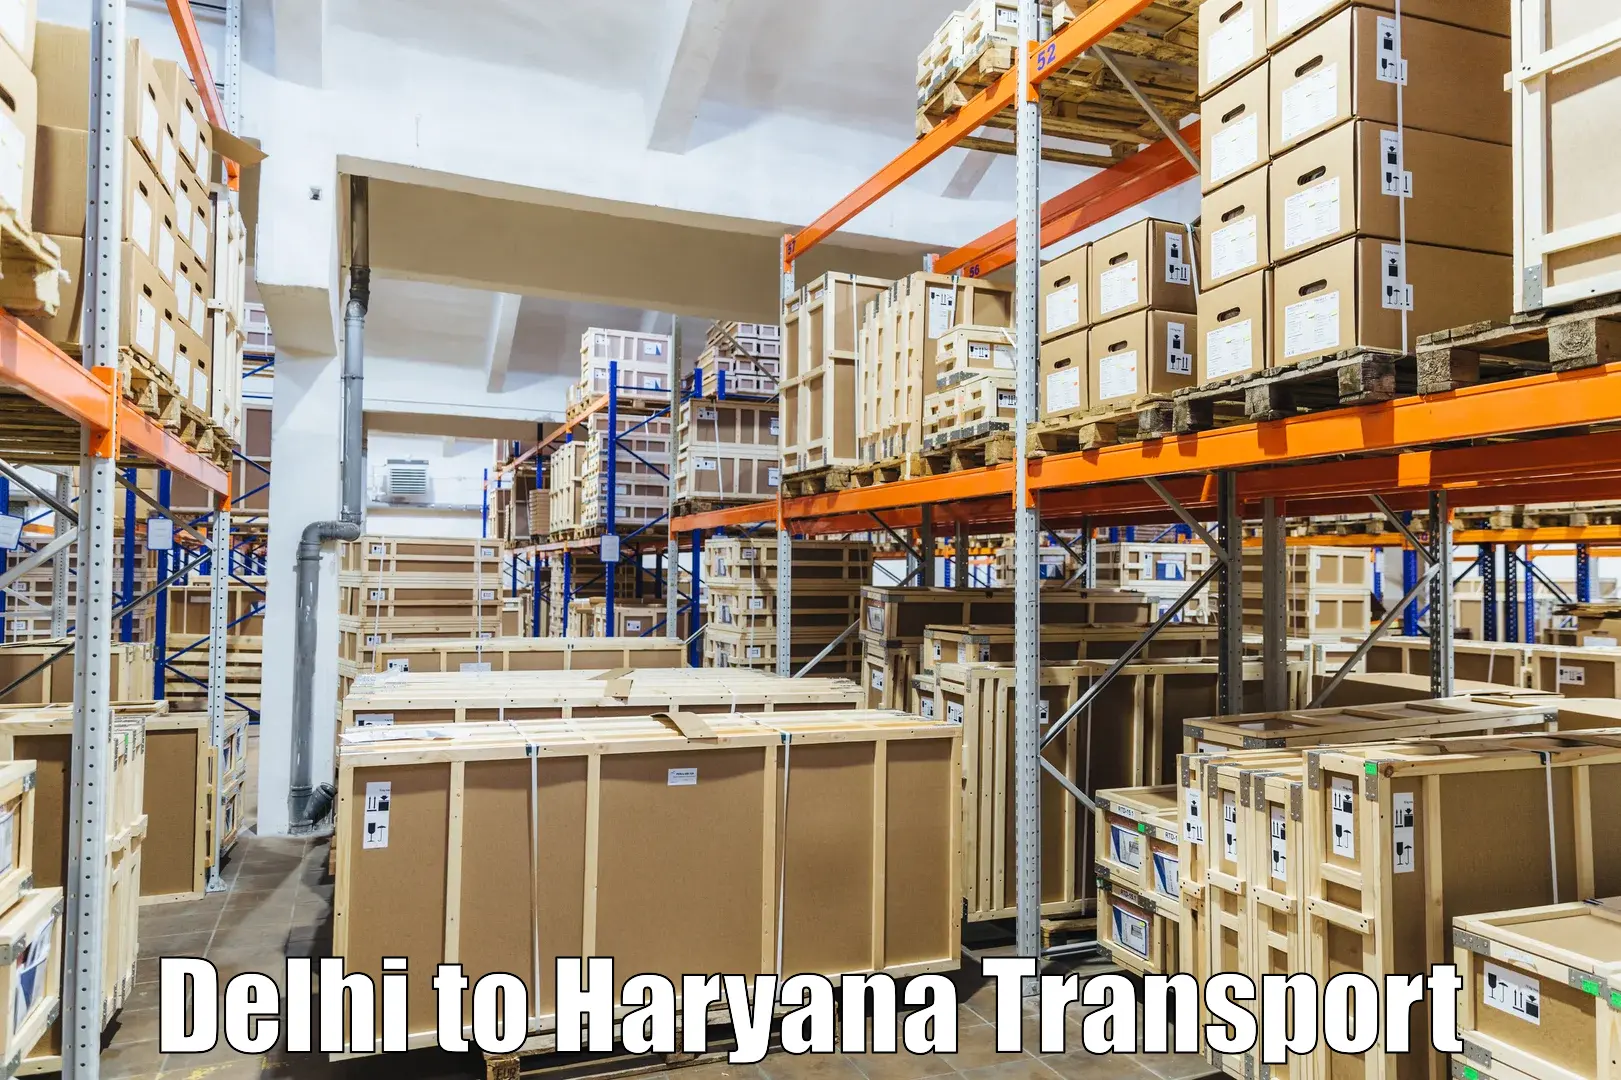 Air freight transport services Delhi to Chaudhary Charan Singh Haryana Agricultural University Hisar